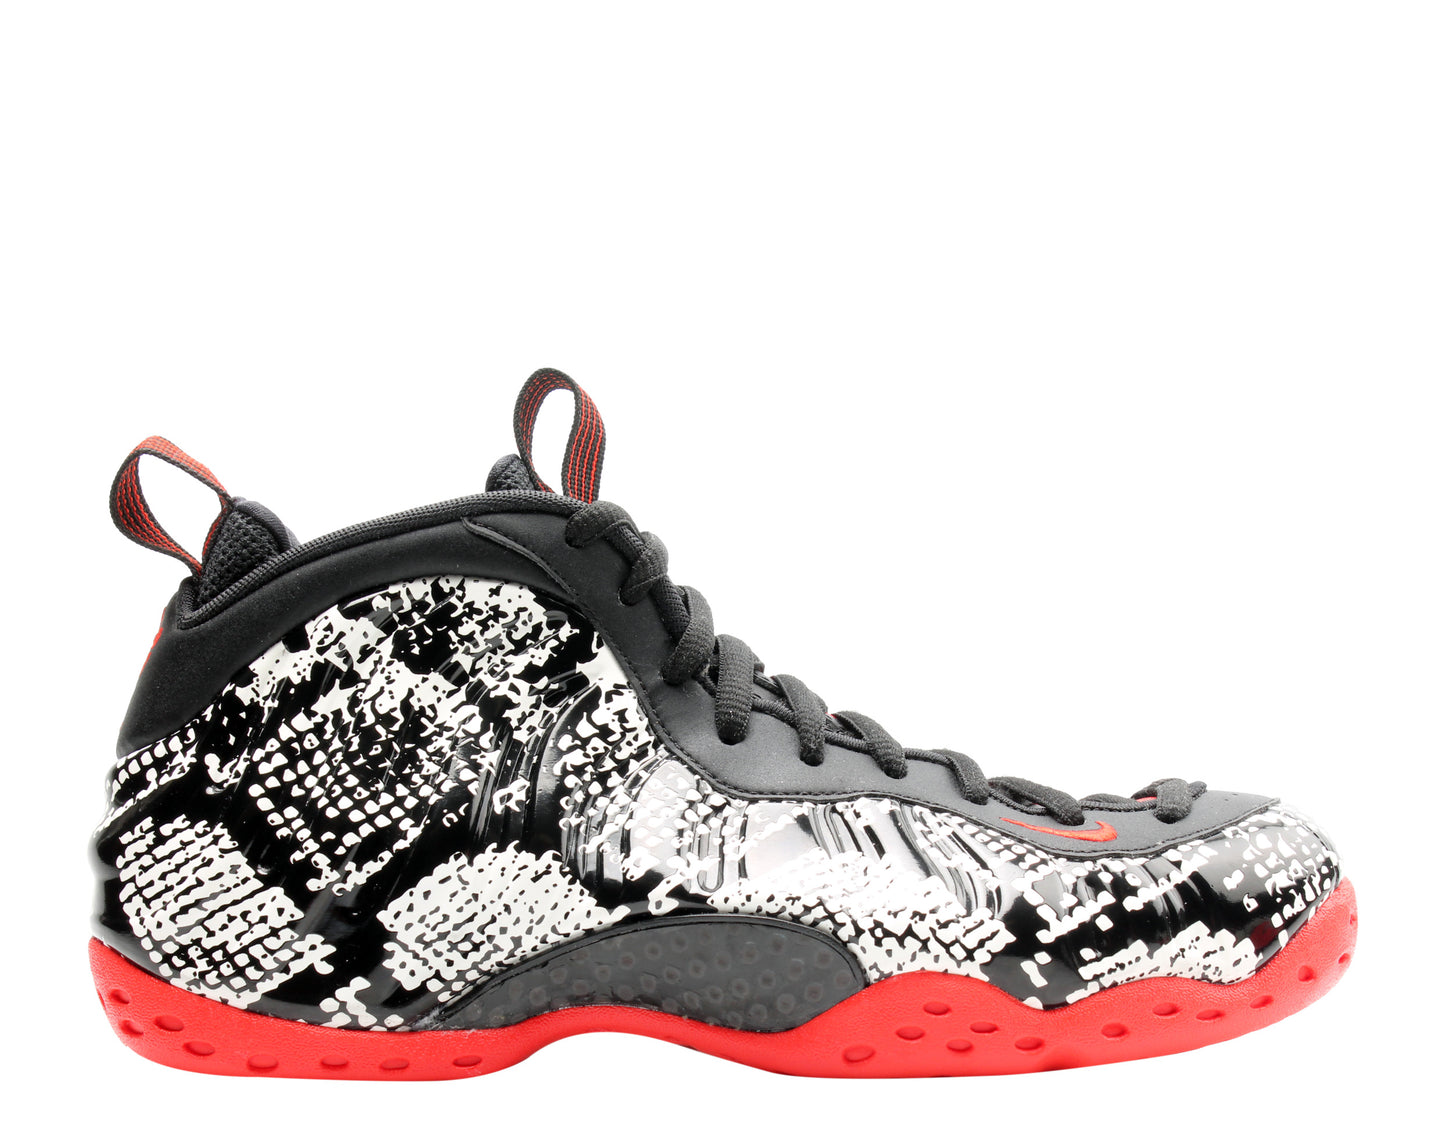 Nike Air Foamposite One Sail/Black-Red Snake Men's Basketball Shoes 314996-101